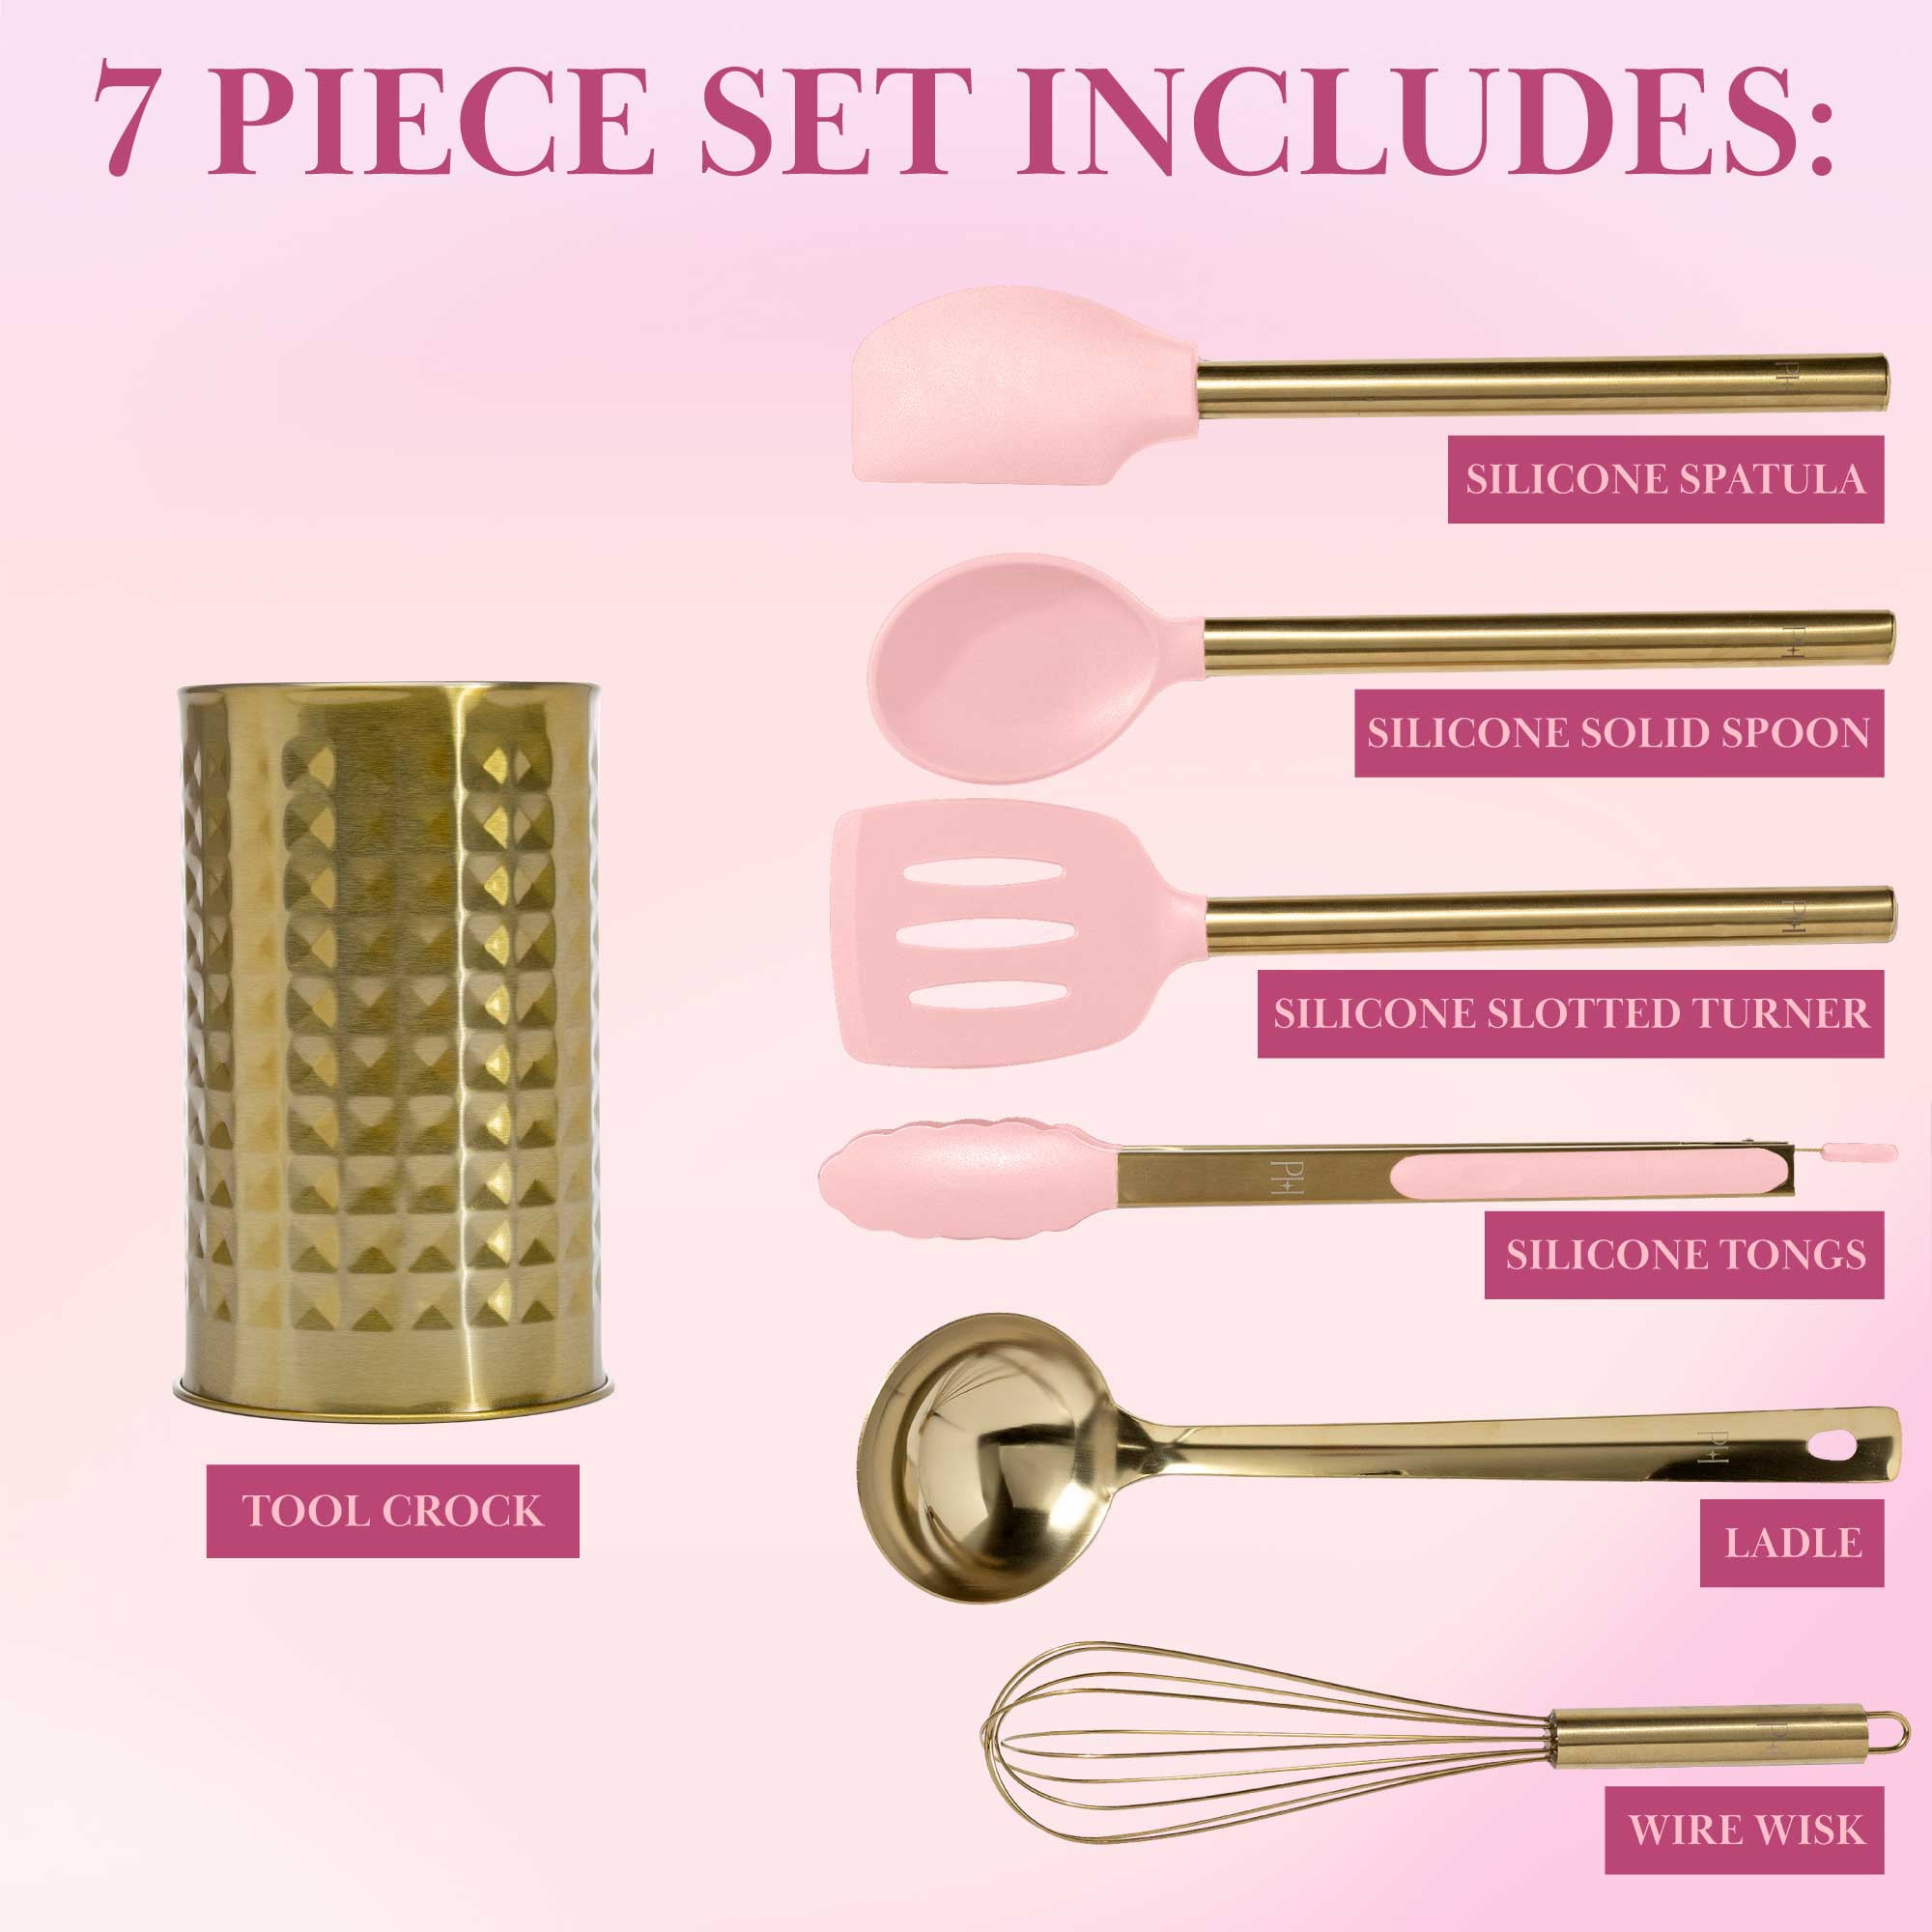 Paris Hilton 7-Piece Cooking Utensils Set, Silicone and Stainless